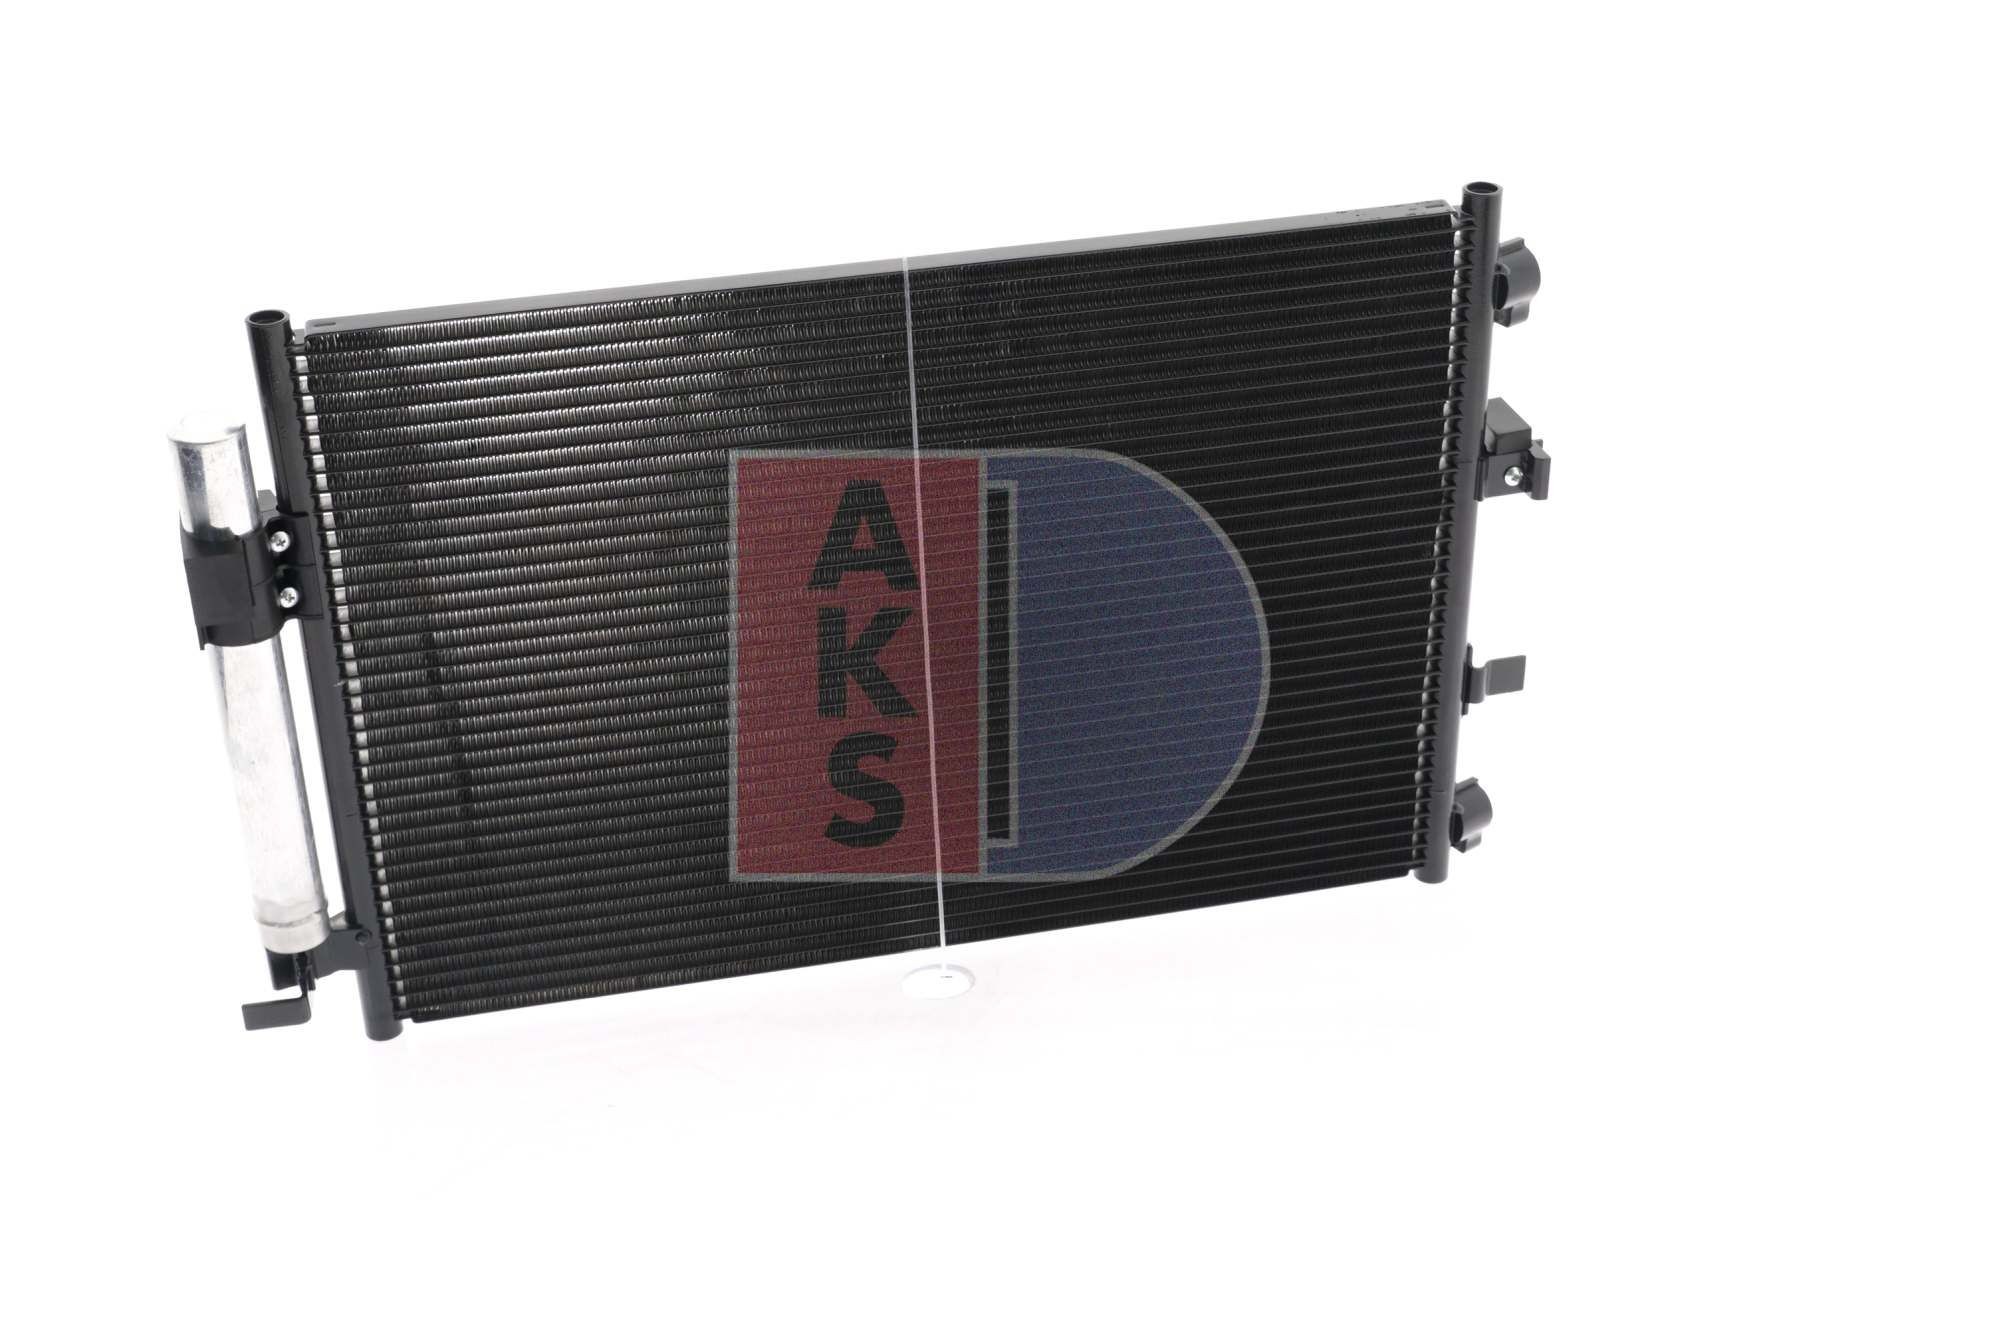 Air conditioning condenser 092052N from AKS DASIS